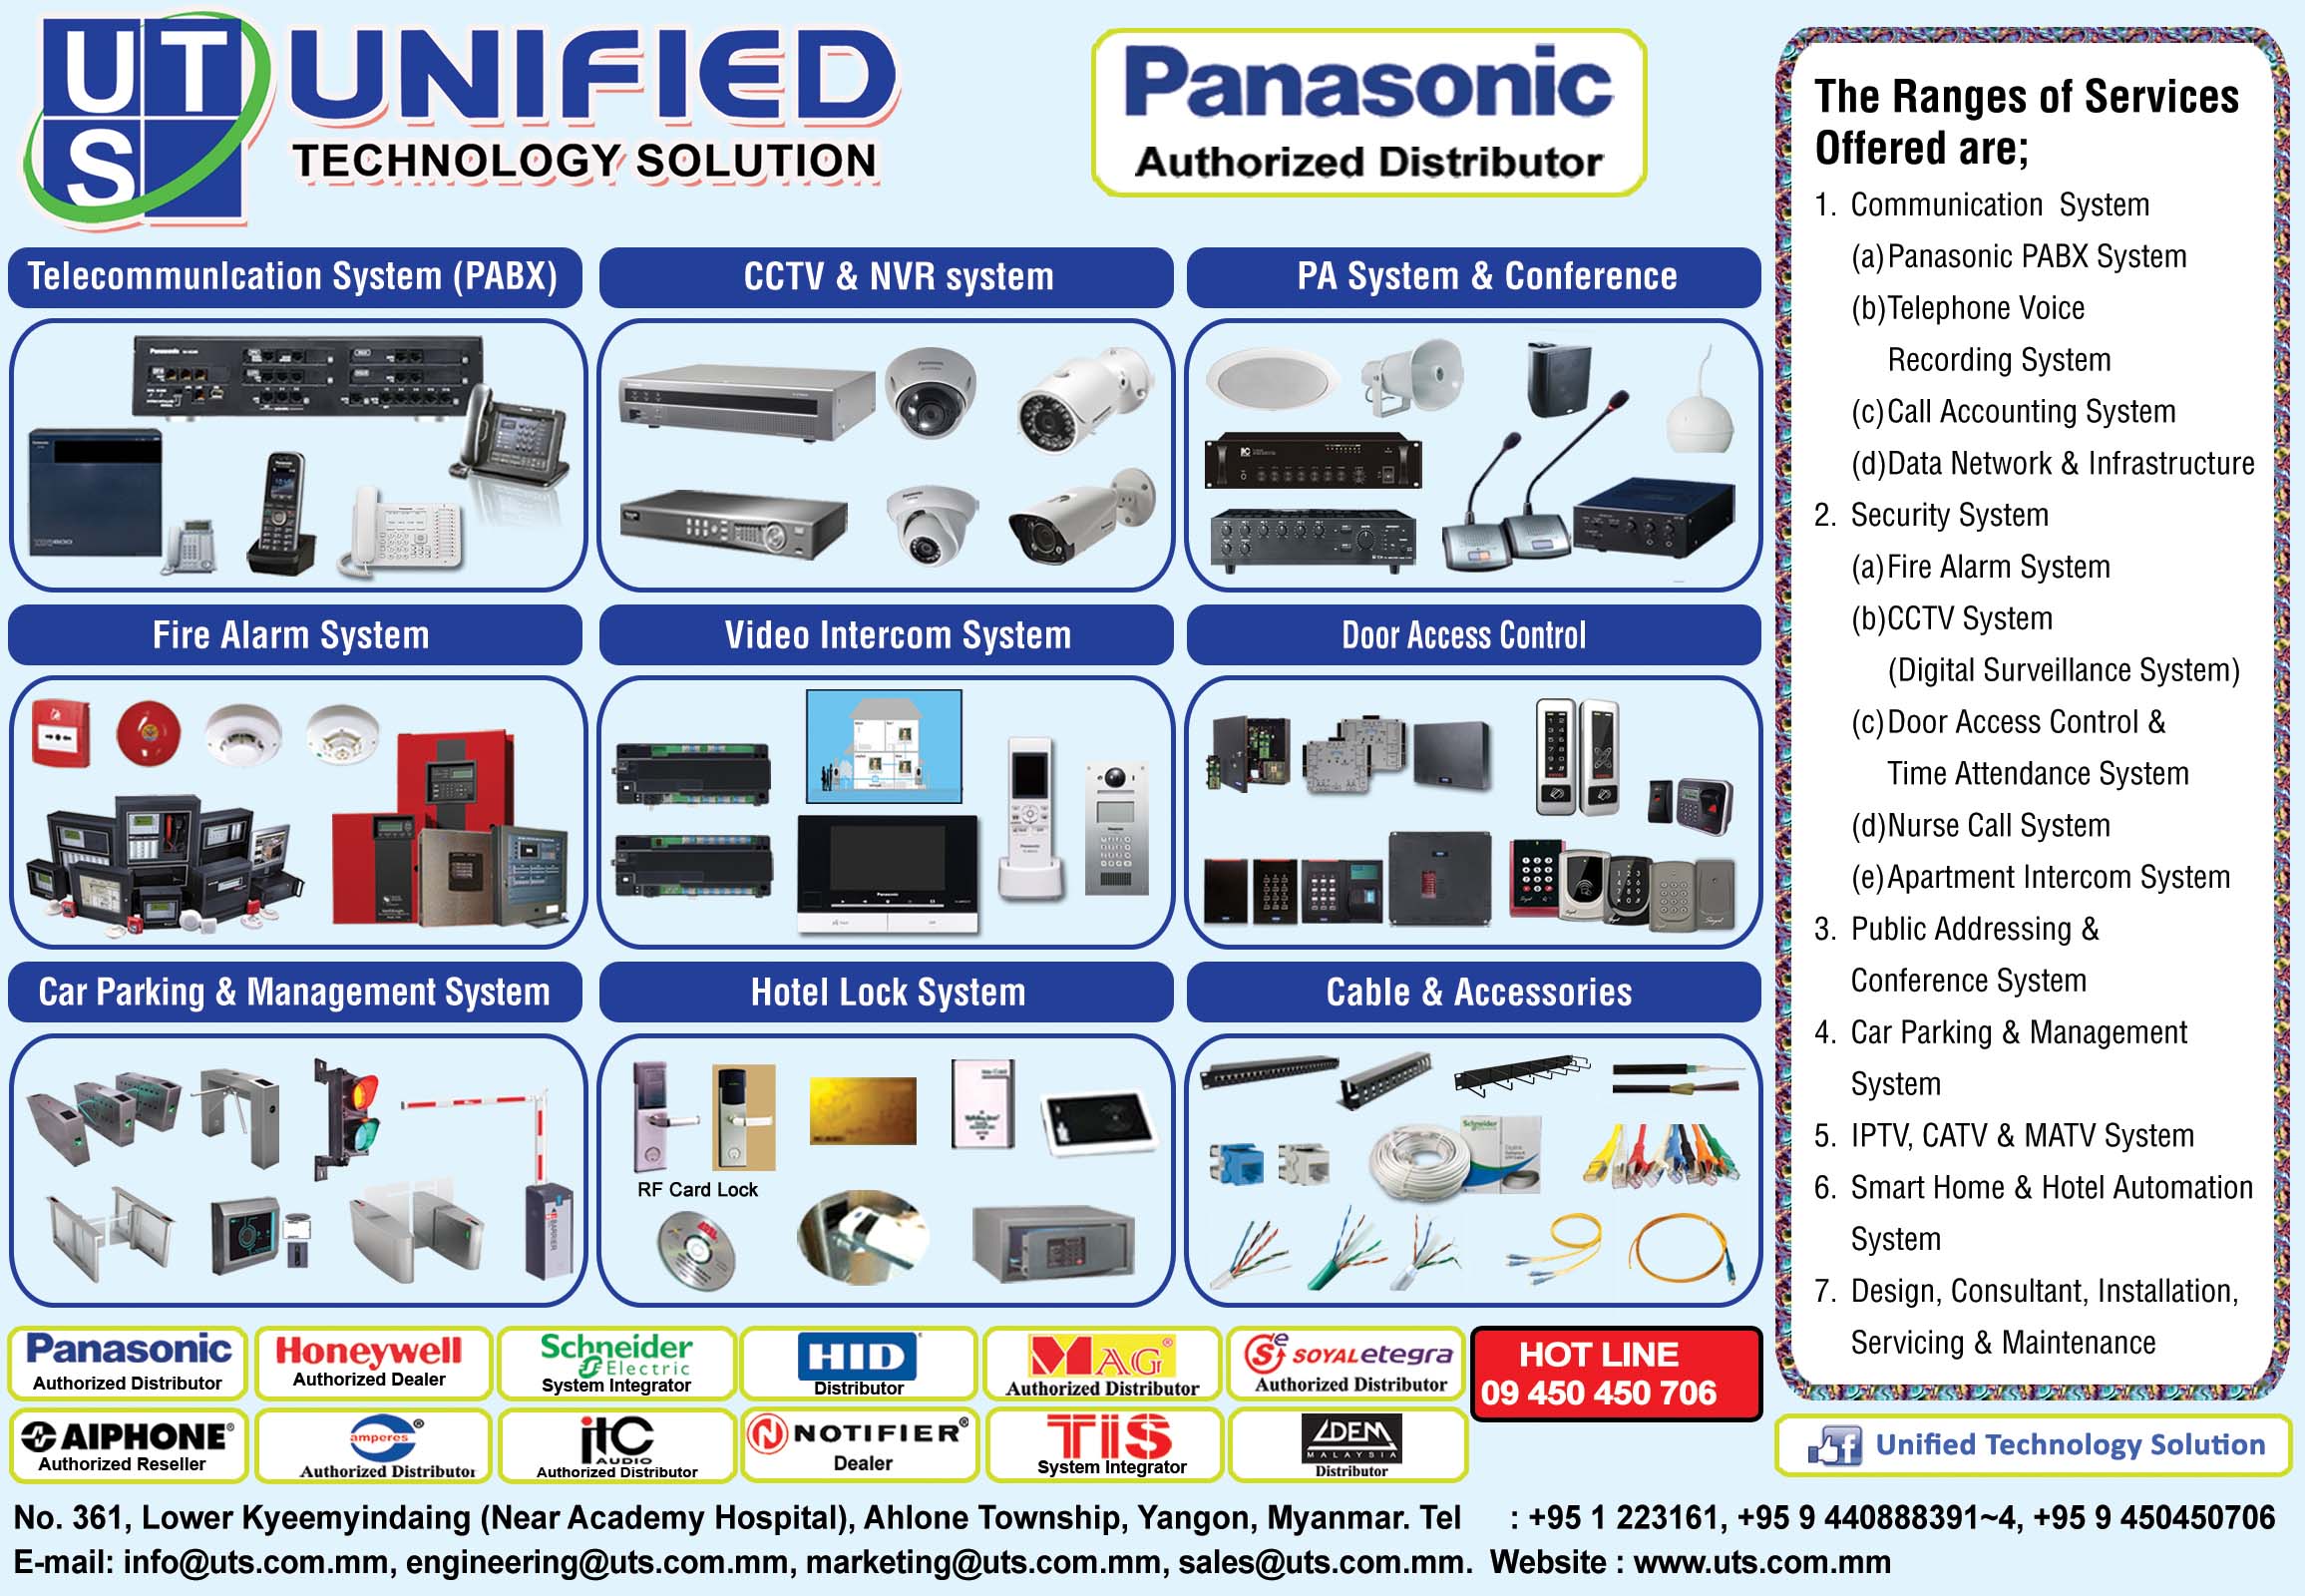 Unified Technology Solution